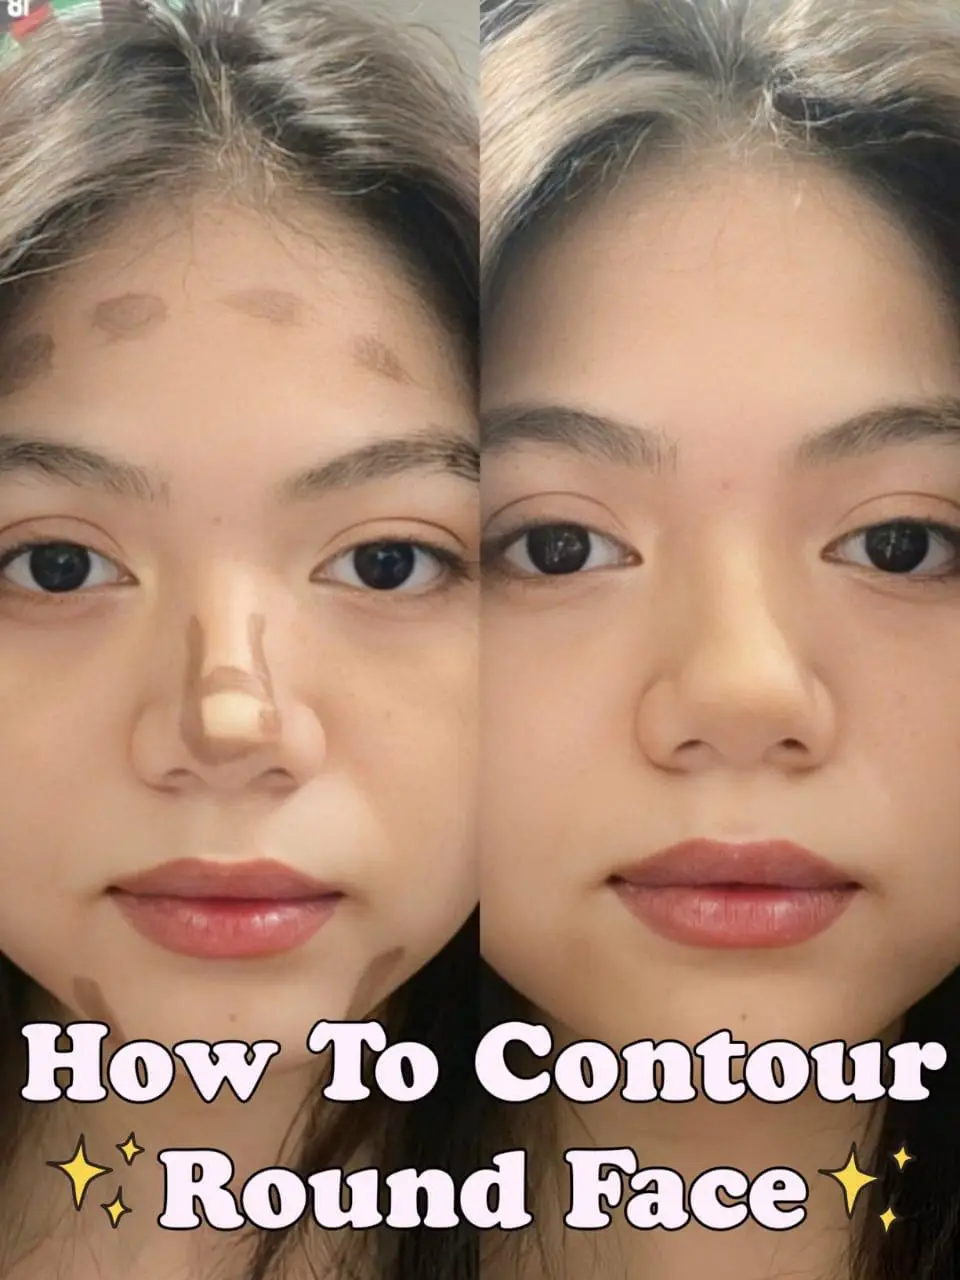 HOW TO CONTOUR ROUND FACE 